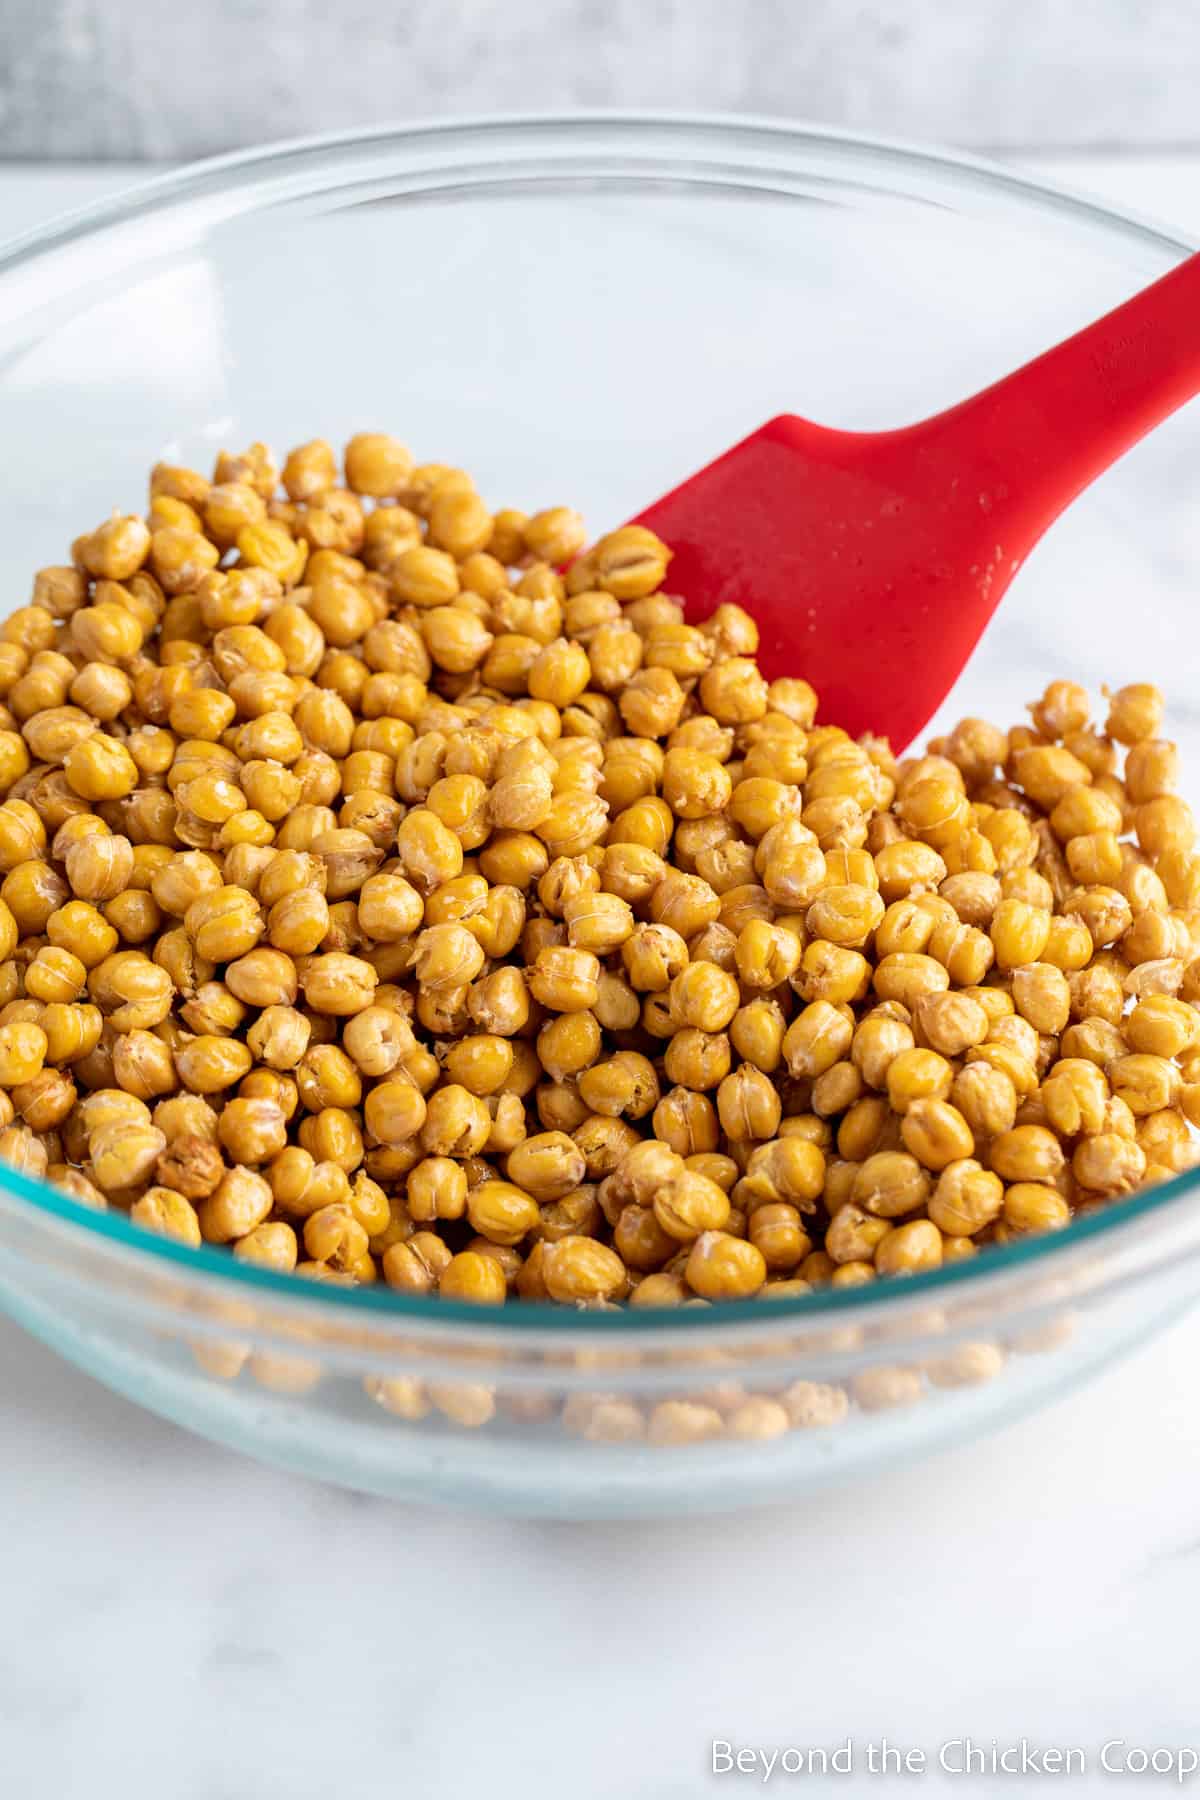 Adding olive oil and seasoning to roasted chickpeas. 